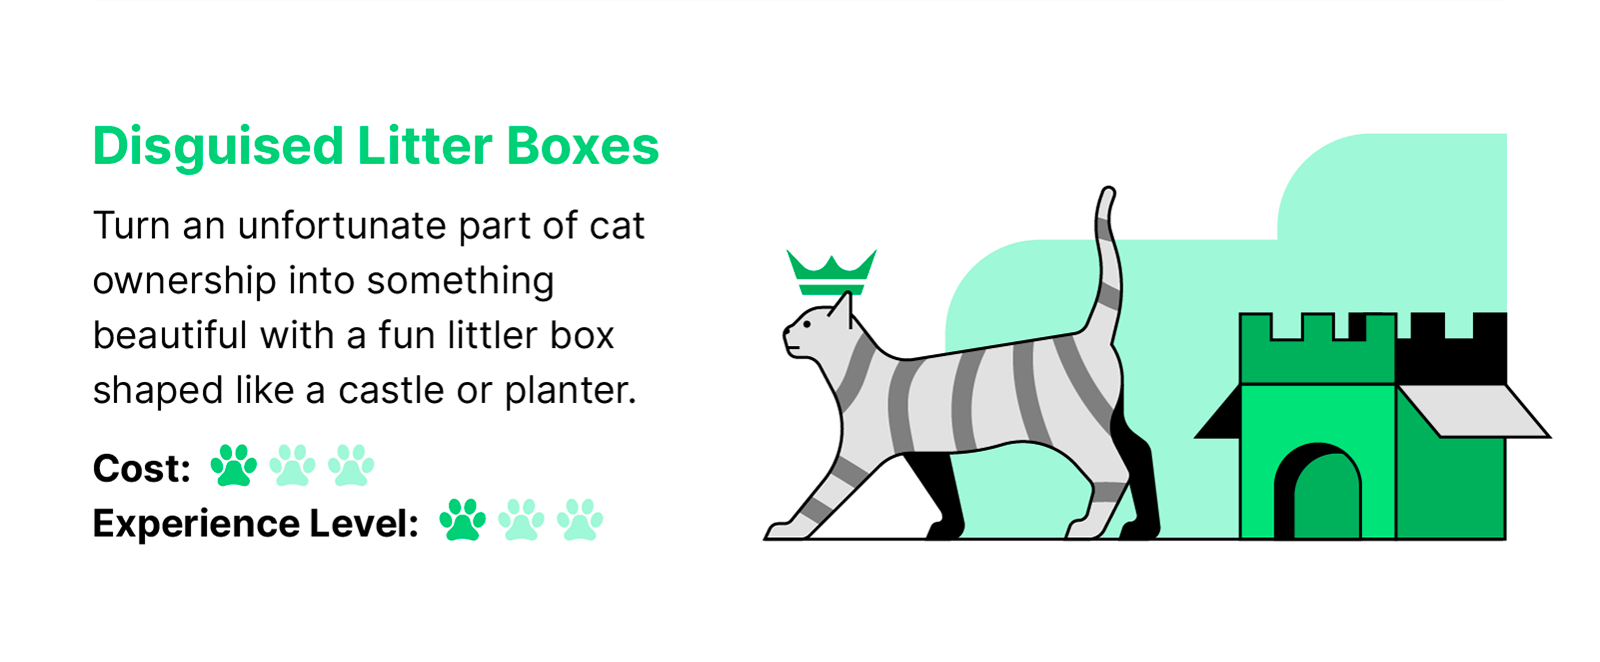 Green black and white illustration of a cat walking away from a litter box shaped like a castle with text